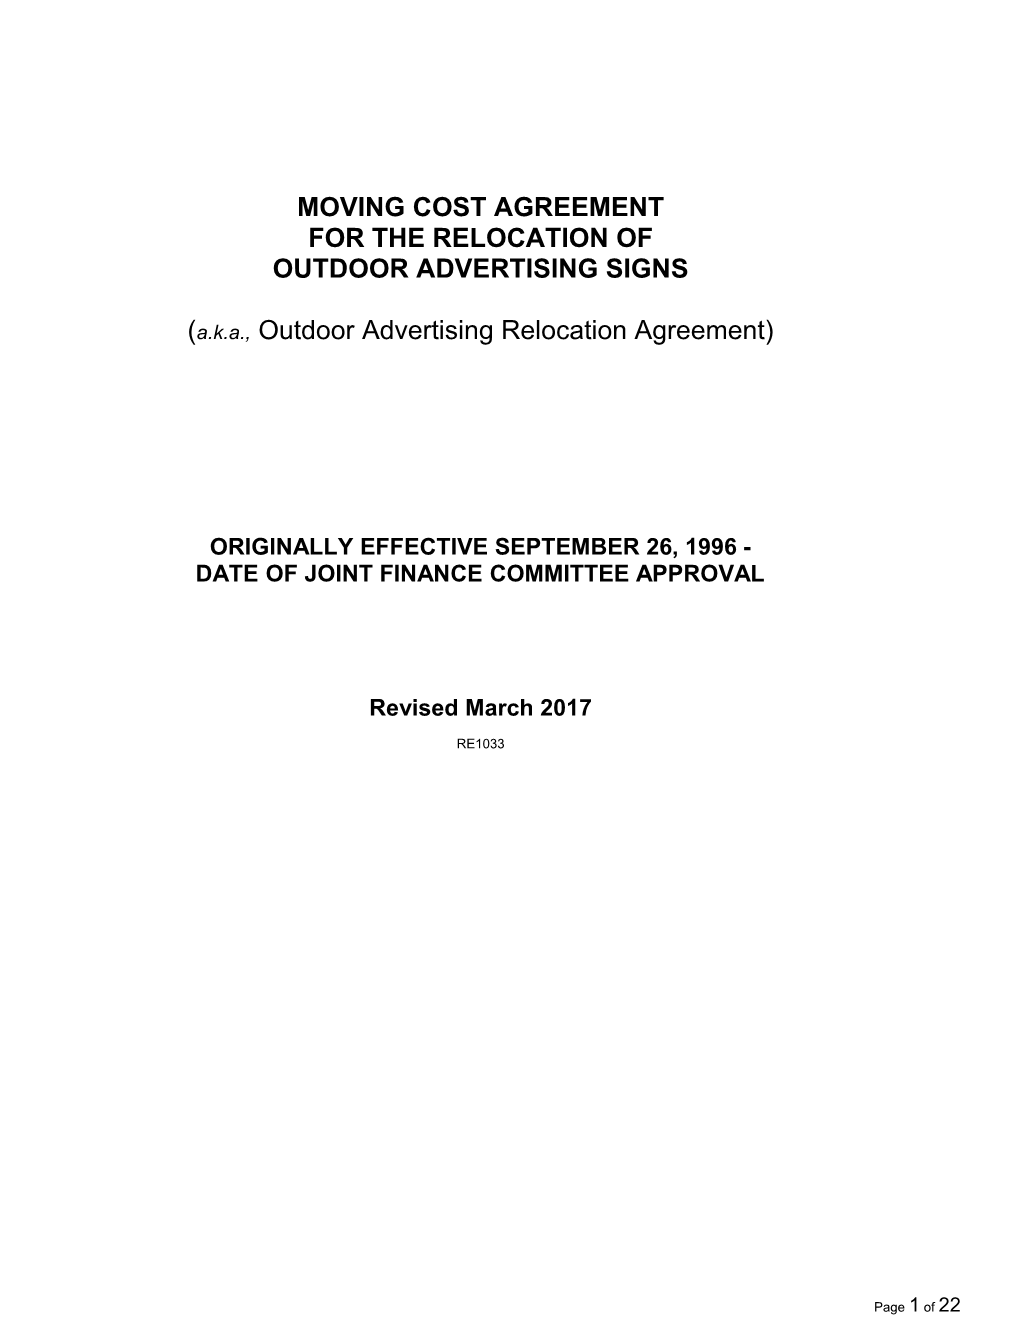 Moving Cost Agreement